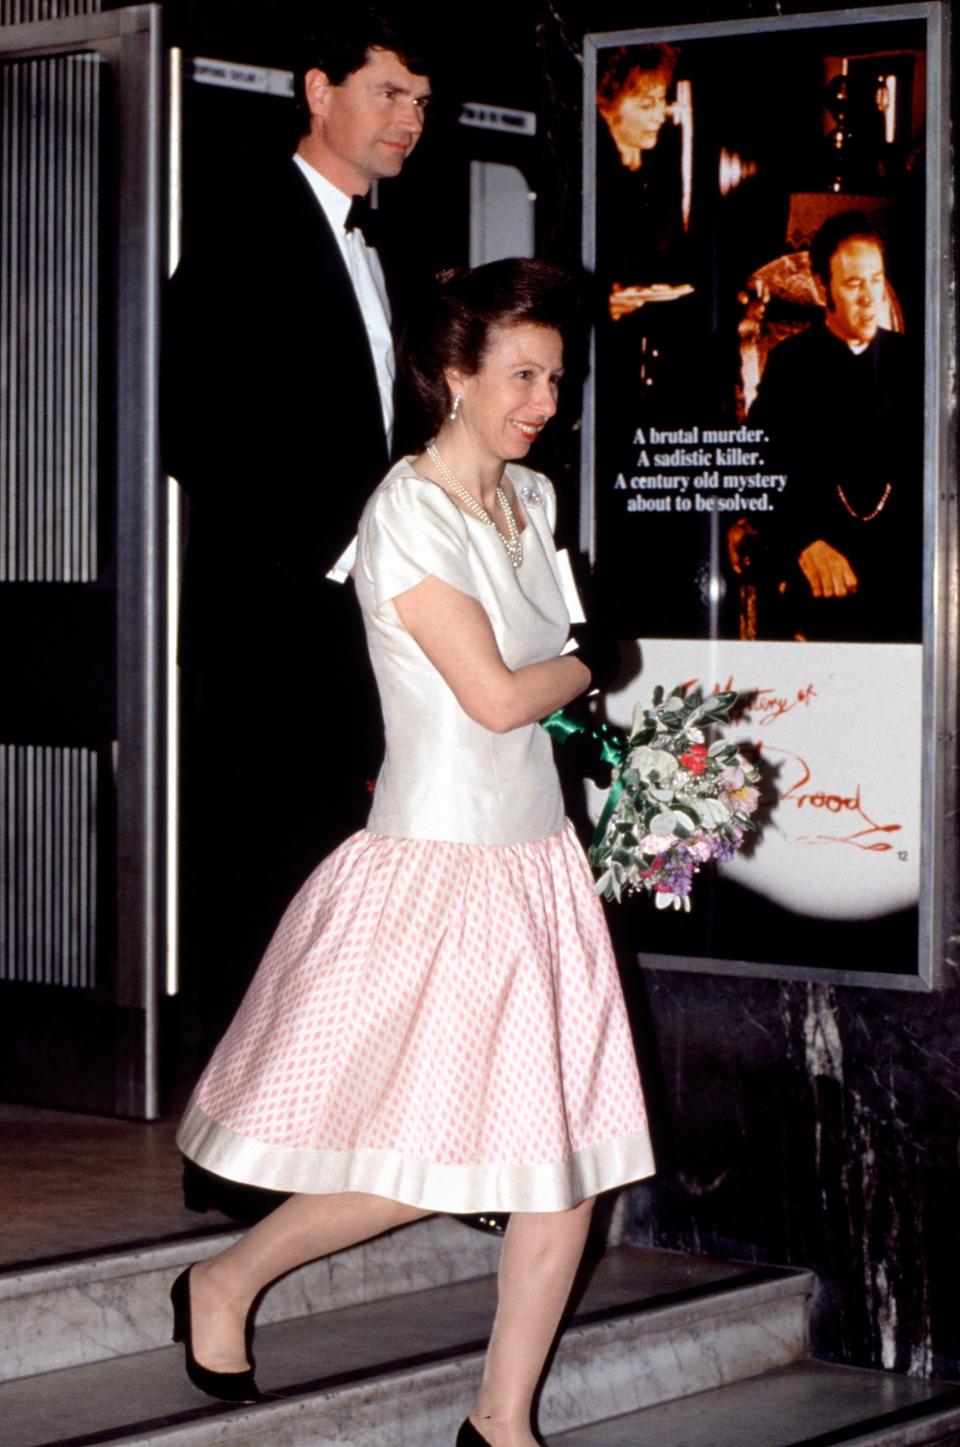 Princess Anne leaving a film premiere with her husband Tim Laurence on April 28, 1993.